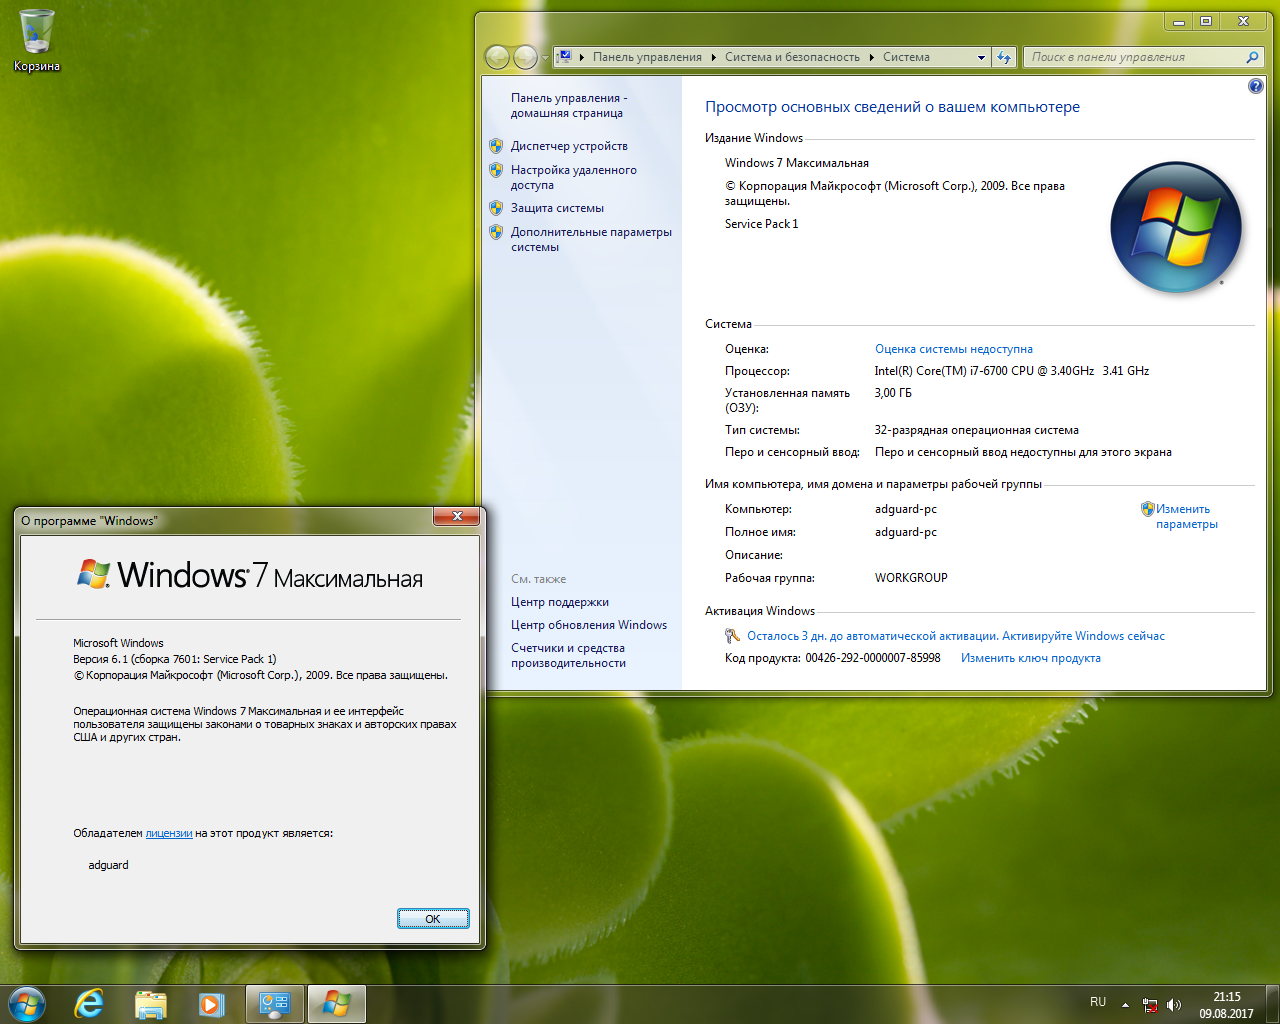 Windows 7 максимальная. Windows 7 sp1 with update [7601.26321]. Сборка Windows 7 sp1 with update 7601.23862 AIO 26in2 Adguard (x86/x64).